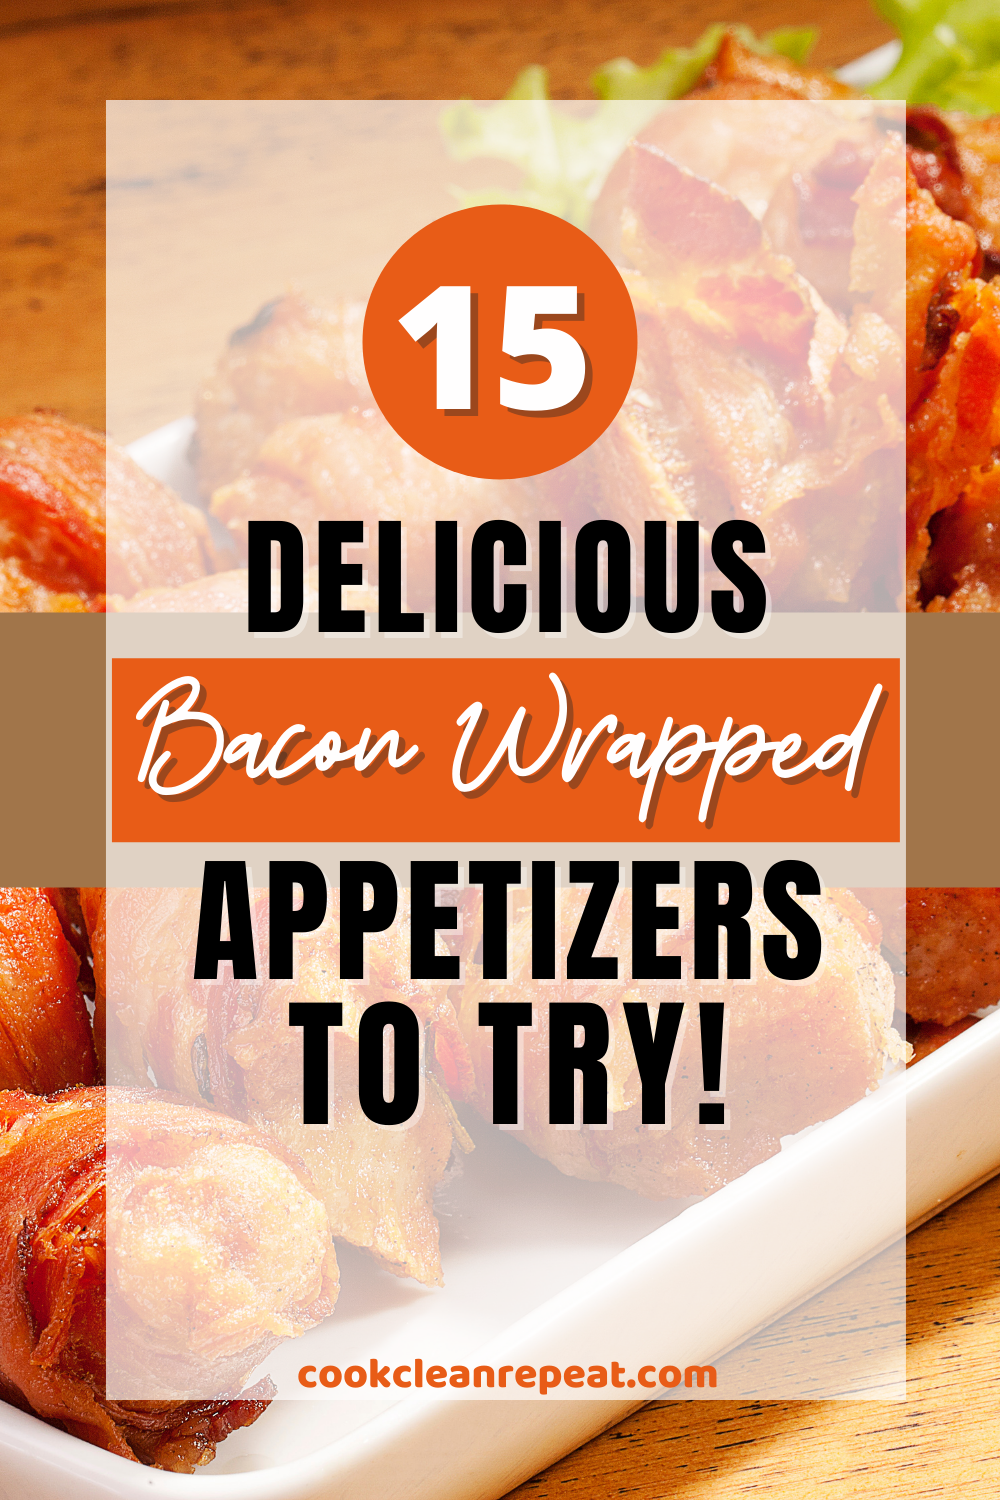 Pin showing the title 15 Delicious Bacon Wrapped Appetizers to Try!